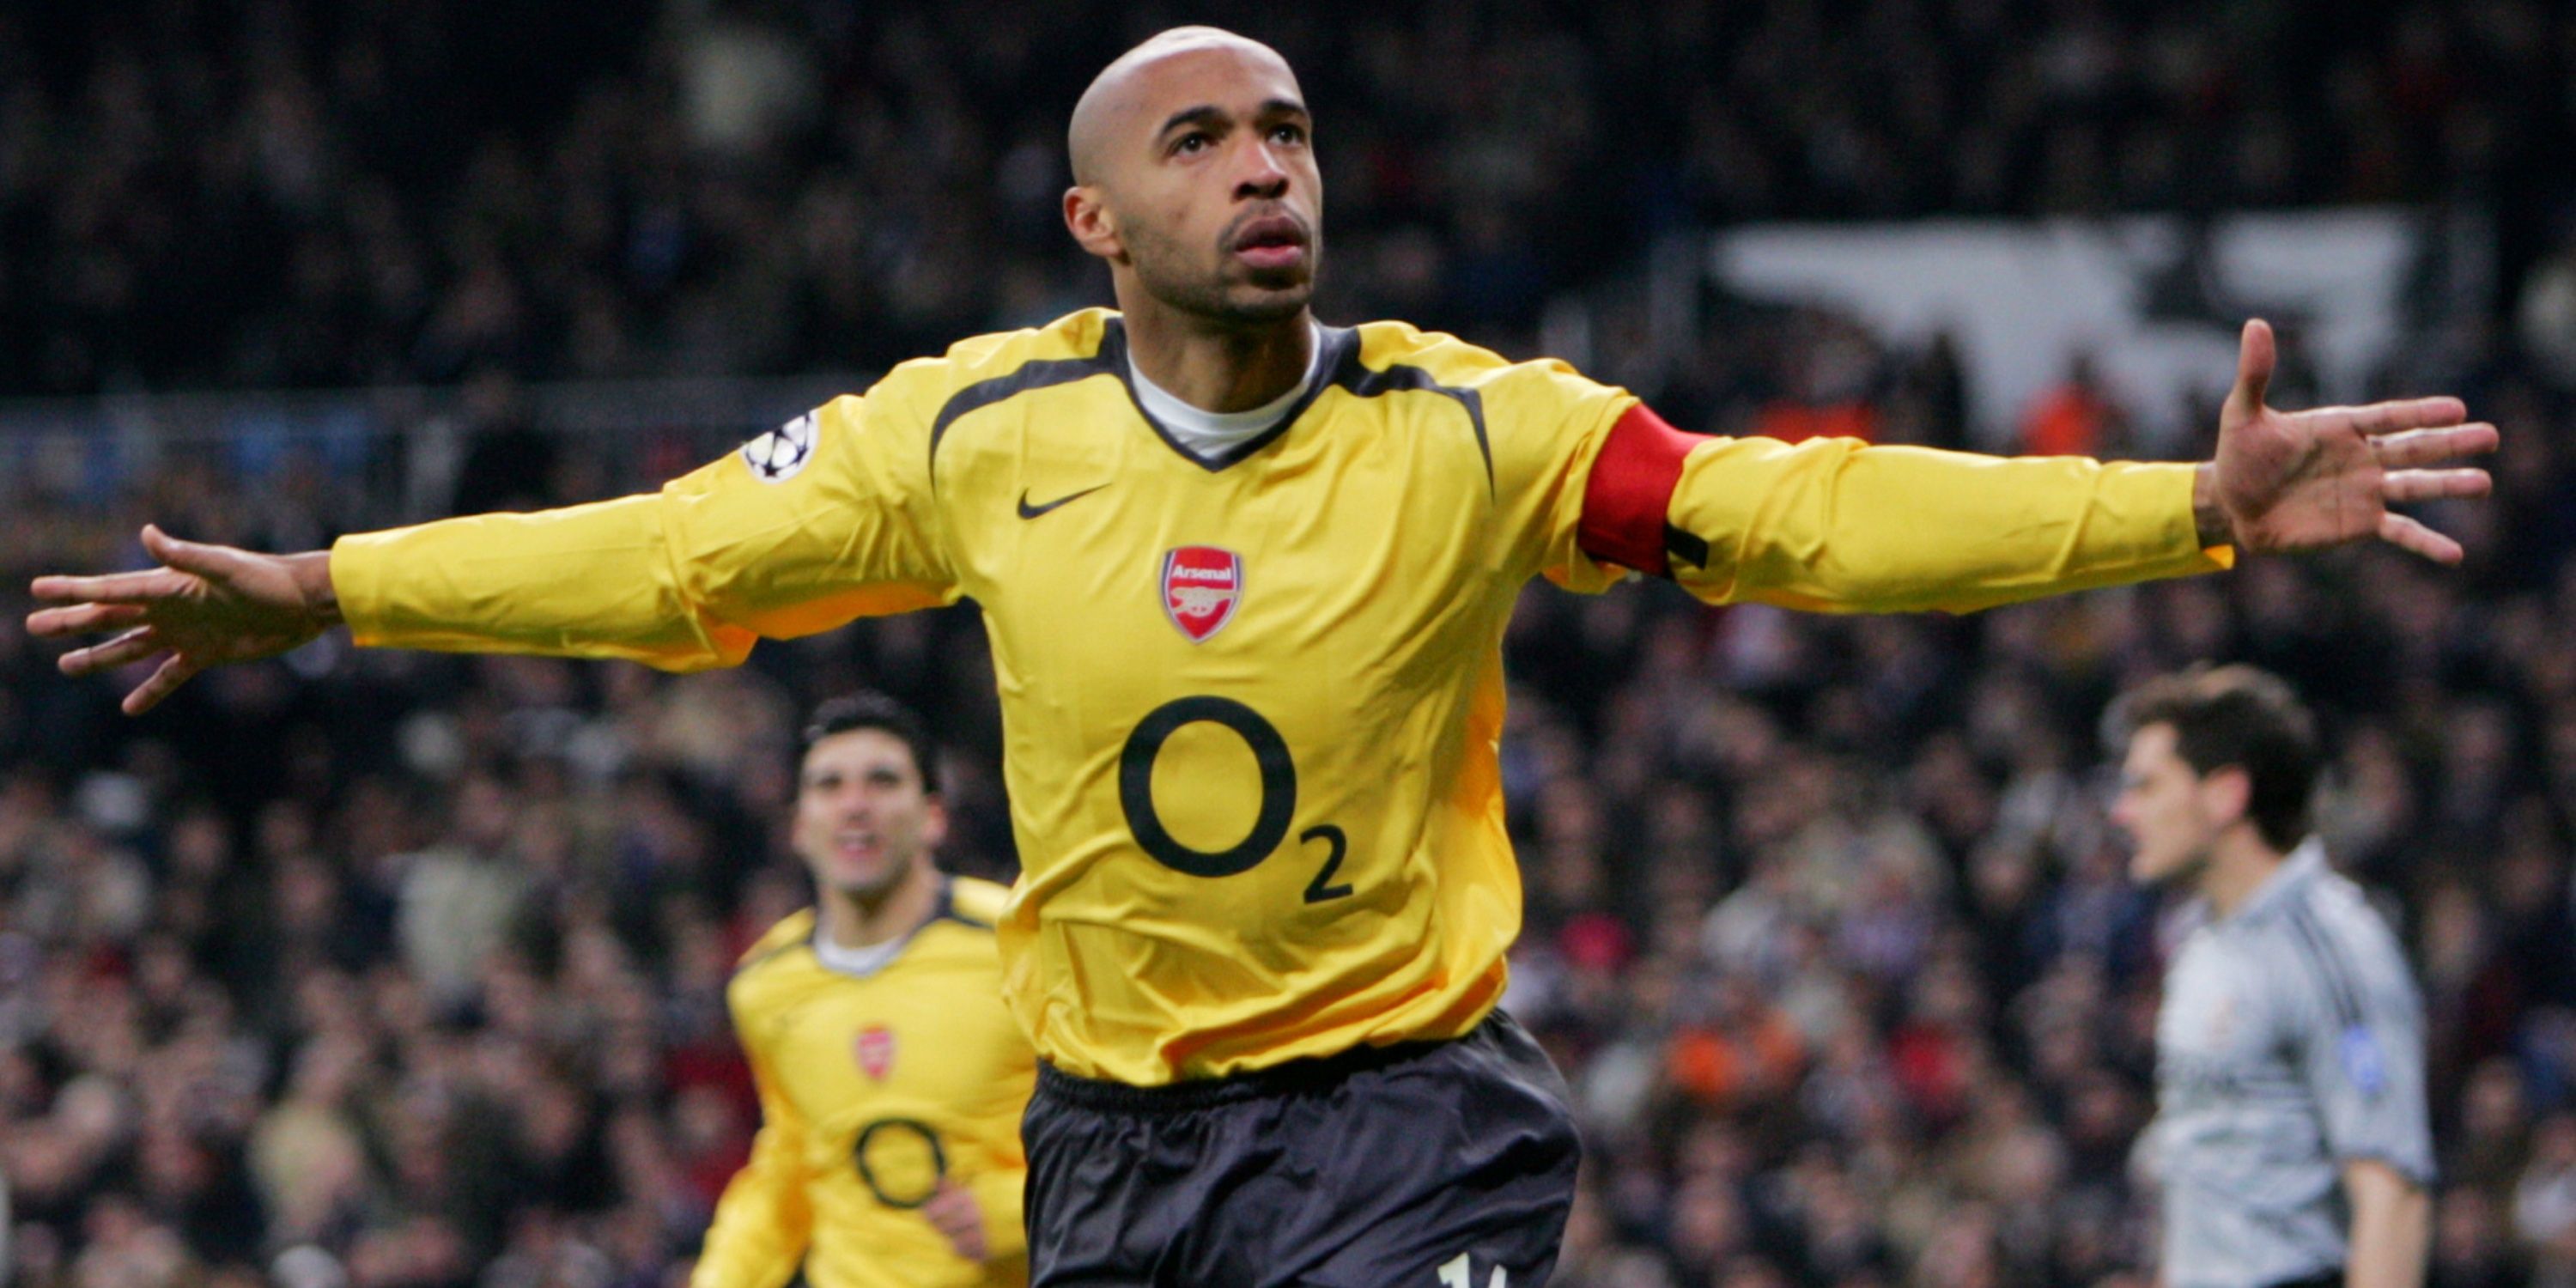 Thierry Henry celebrating one of his record-breaking goals for Arsenal